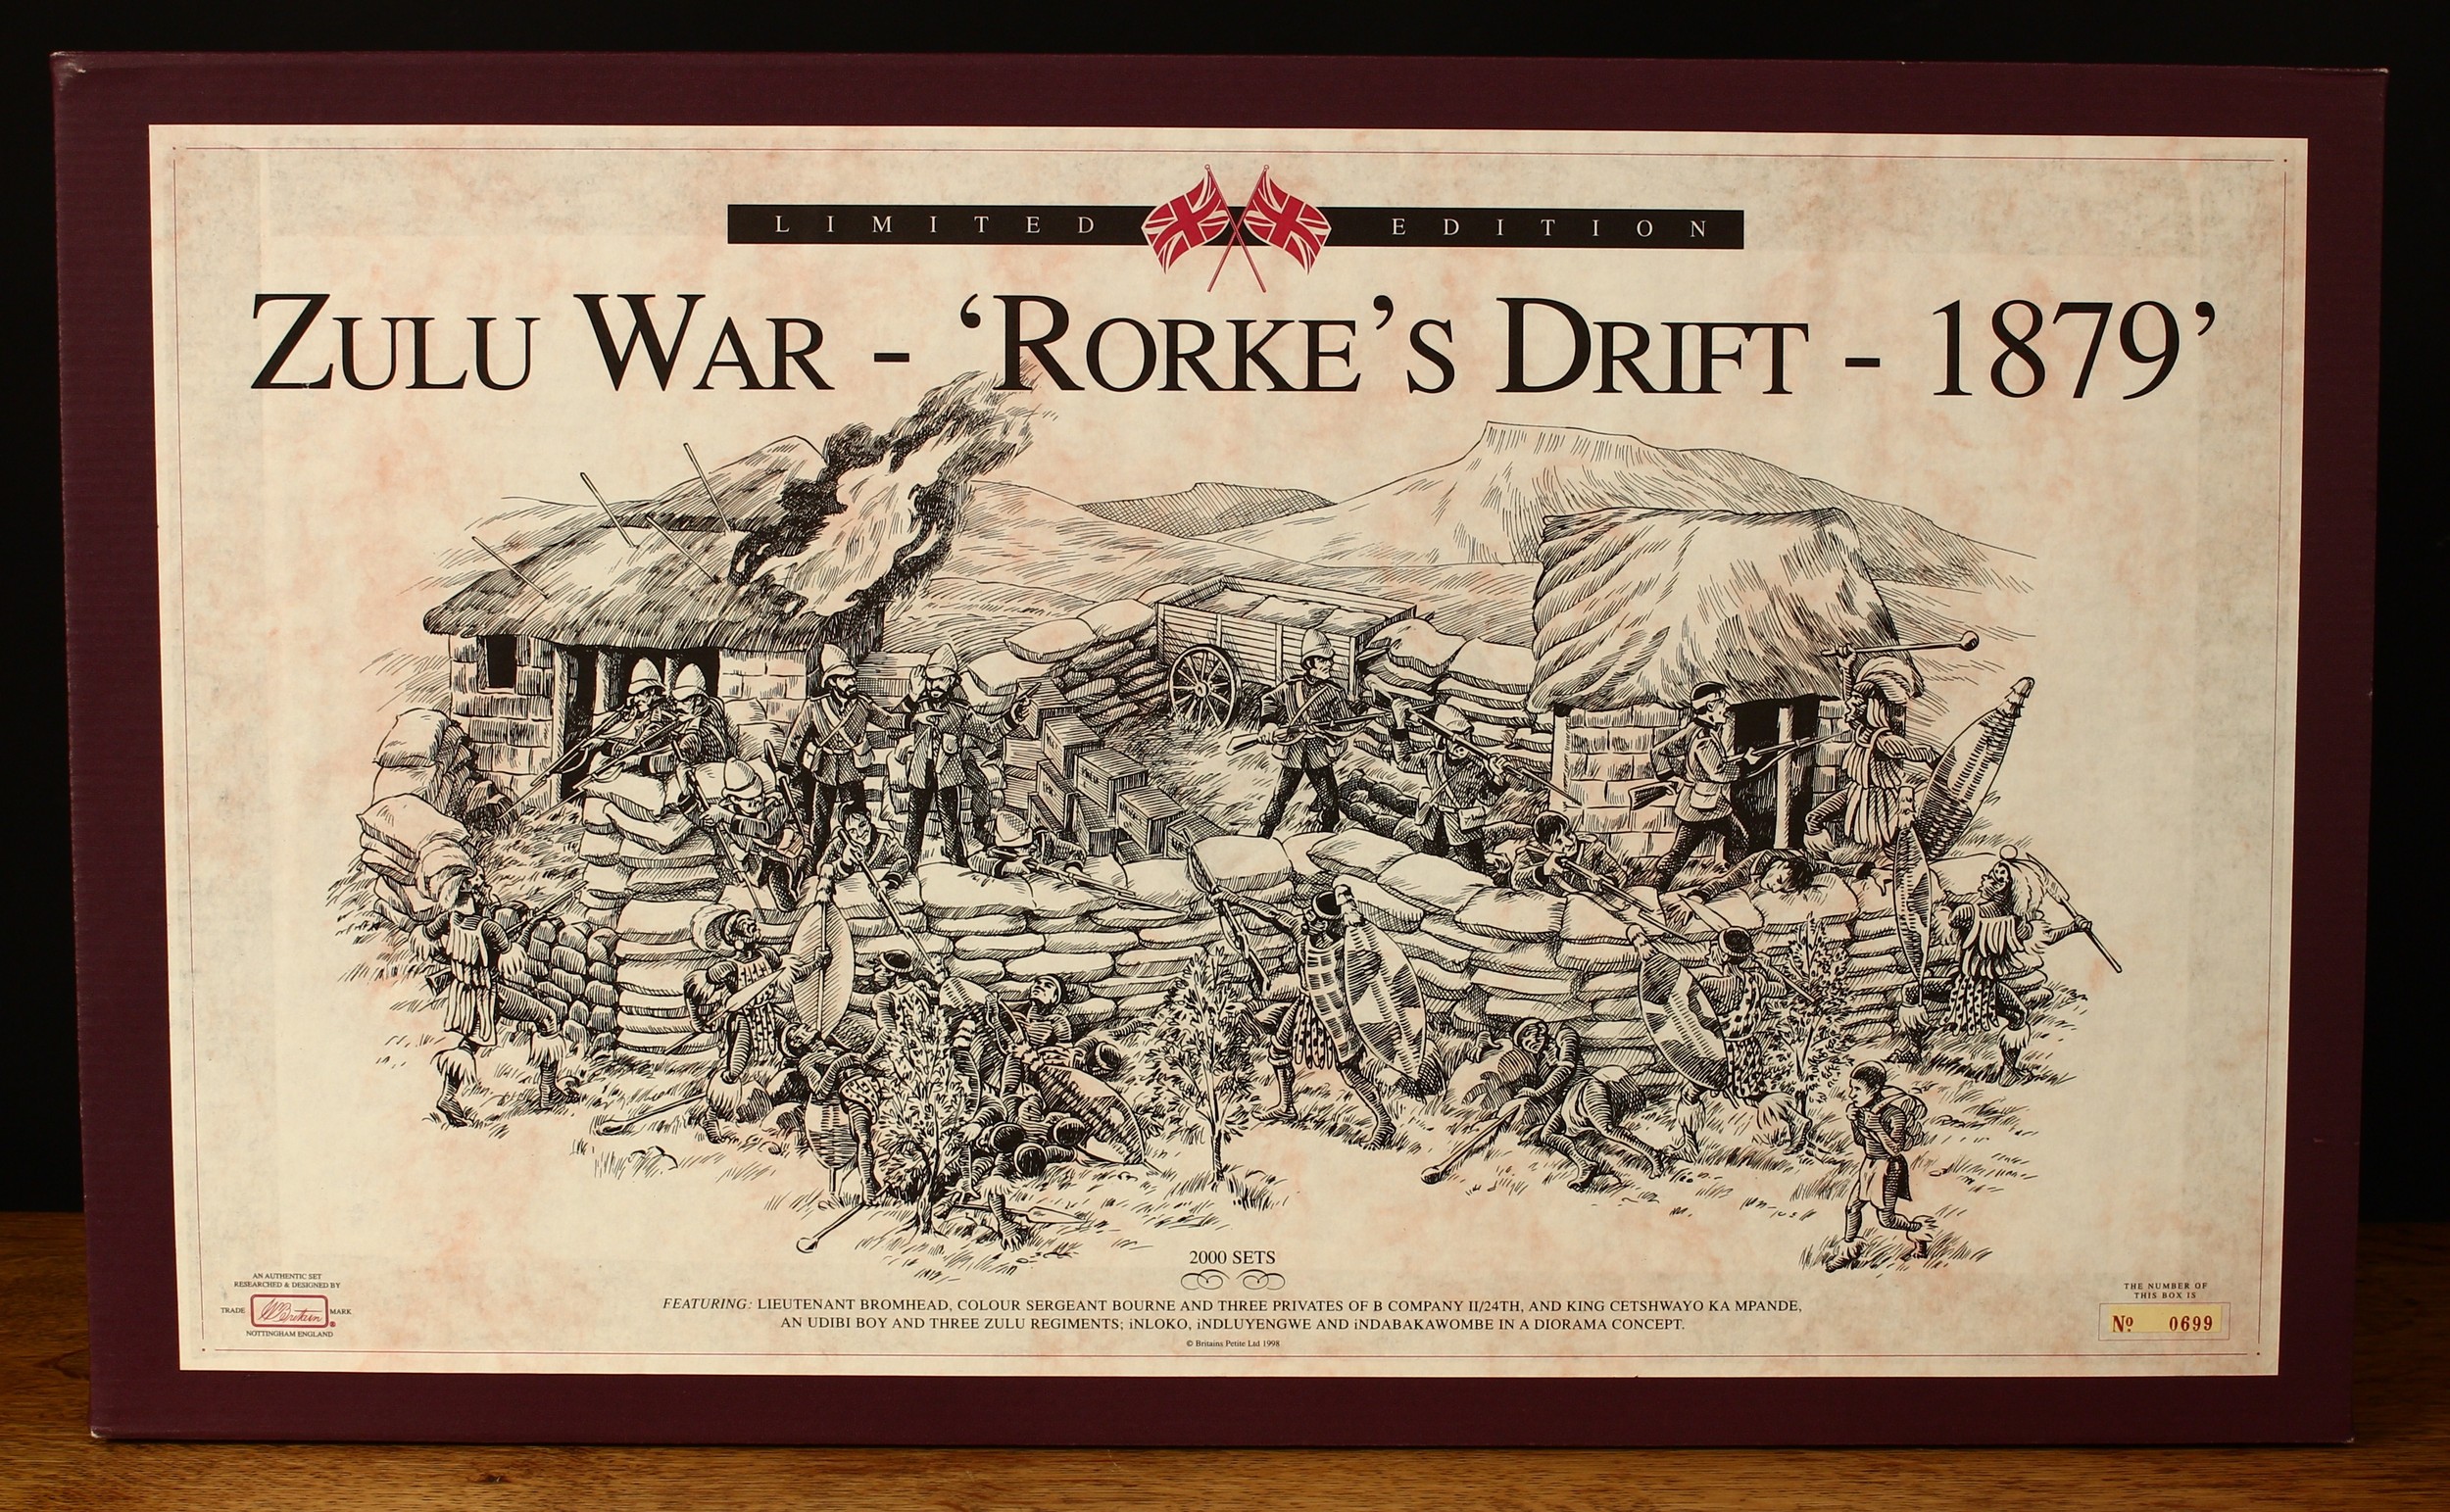 W Britain (Britains) Zulu War - Rorke's Drift 1879 set, boxed with literature and outer cardboard